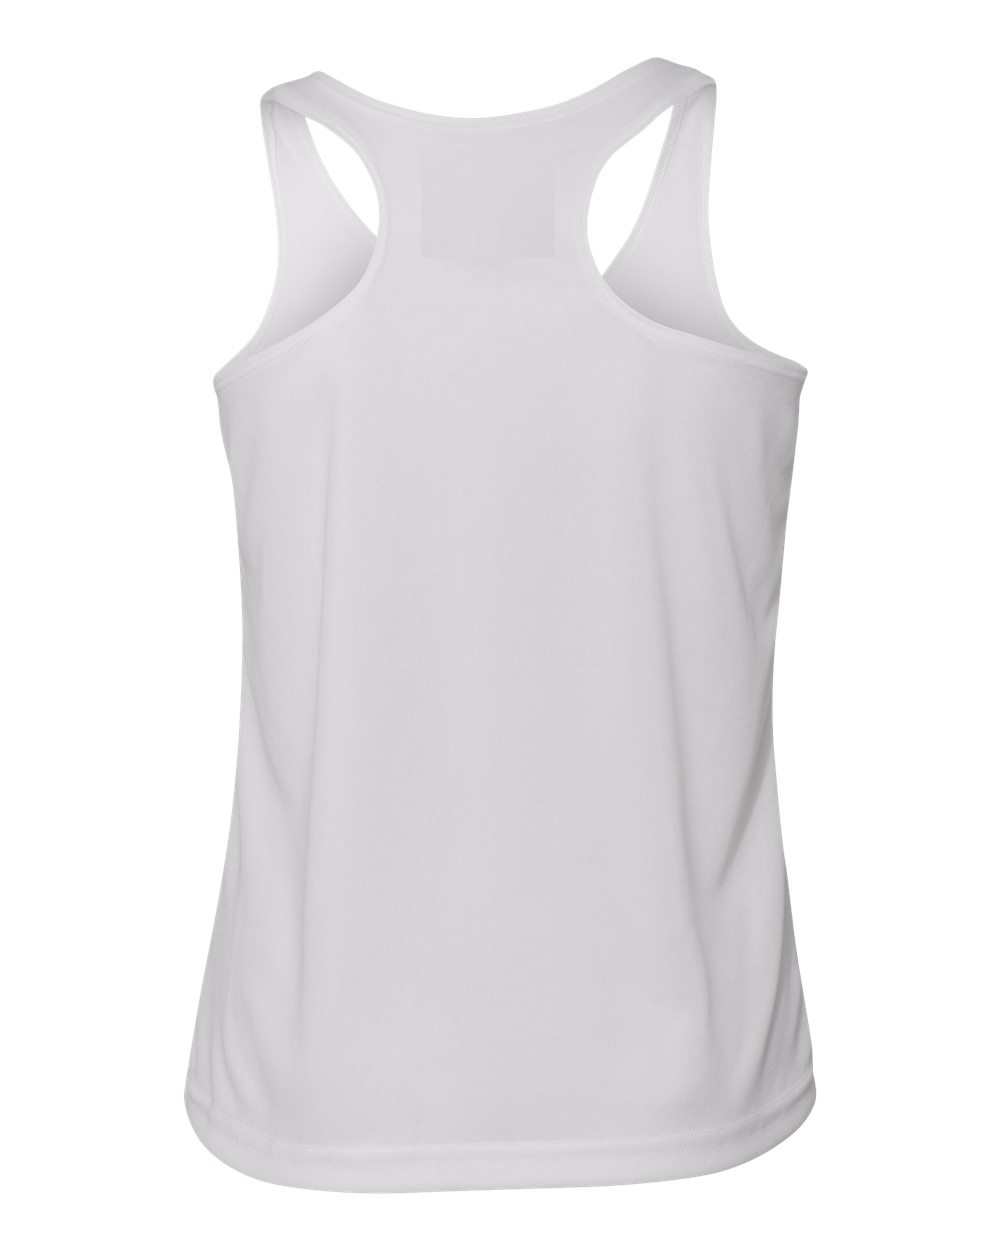 Youth Team Racerback Wicking Tank Top